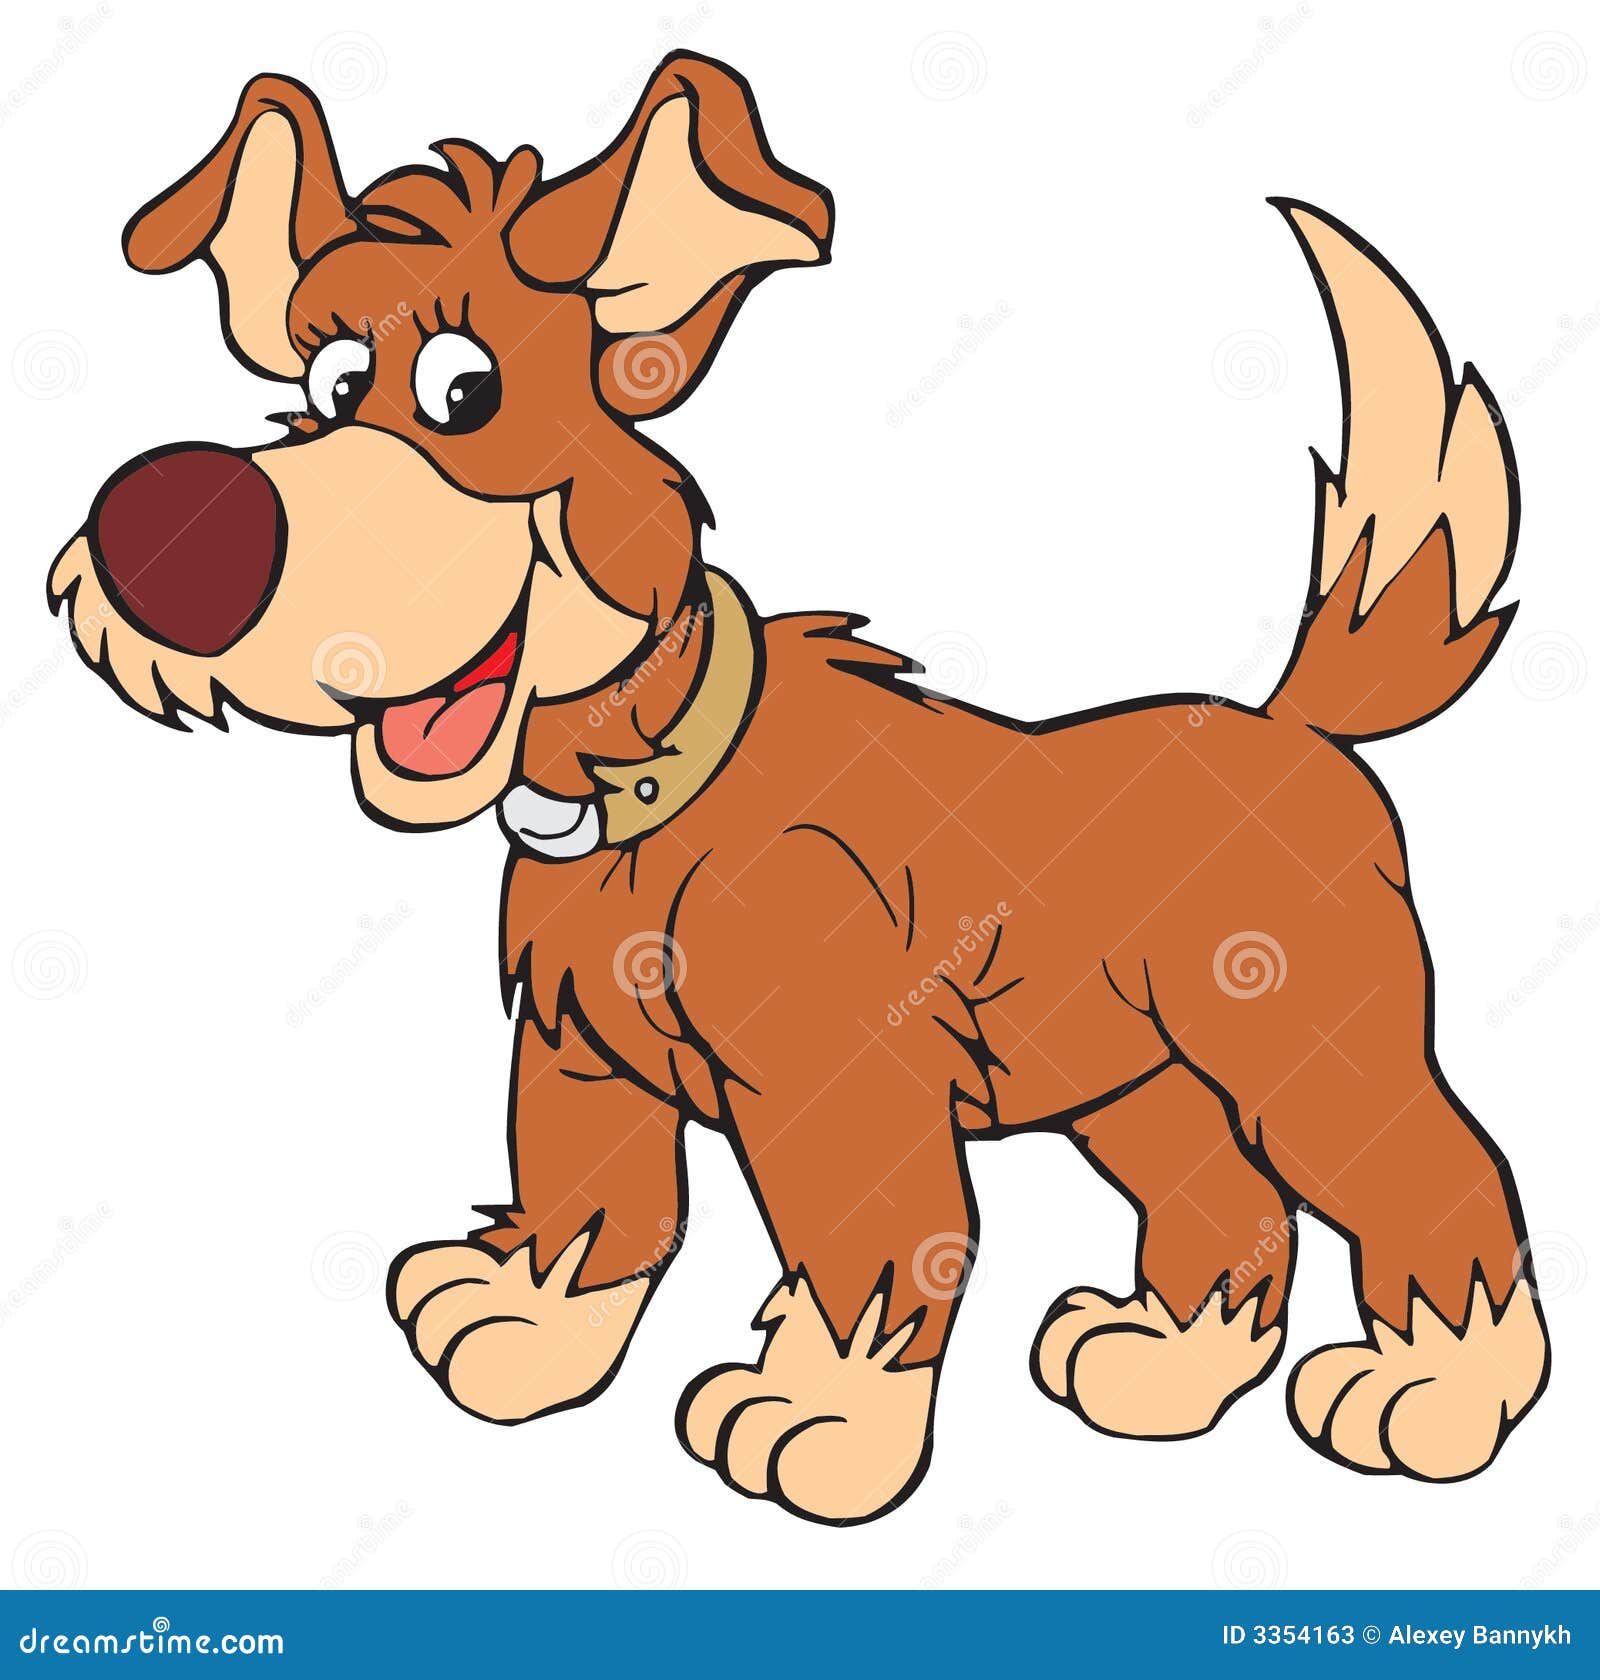 clipart images of dogs - photo #45